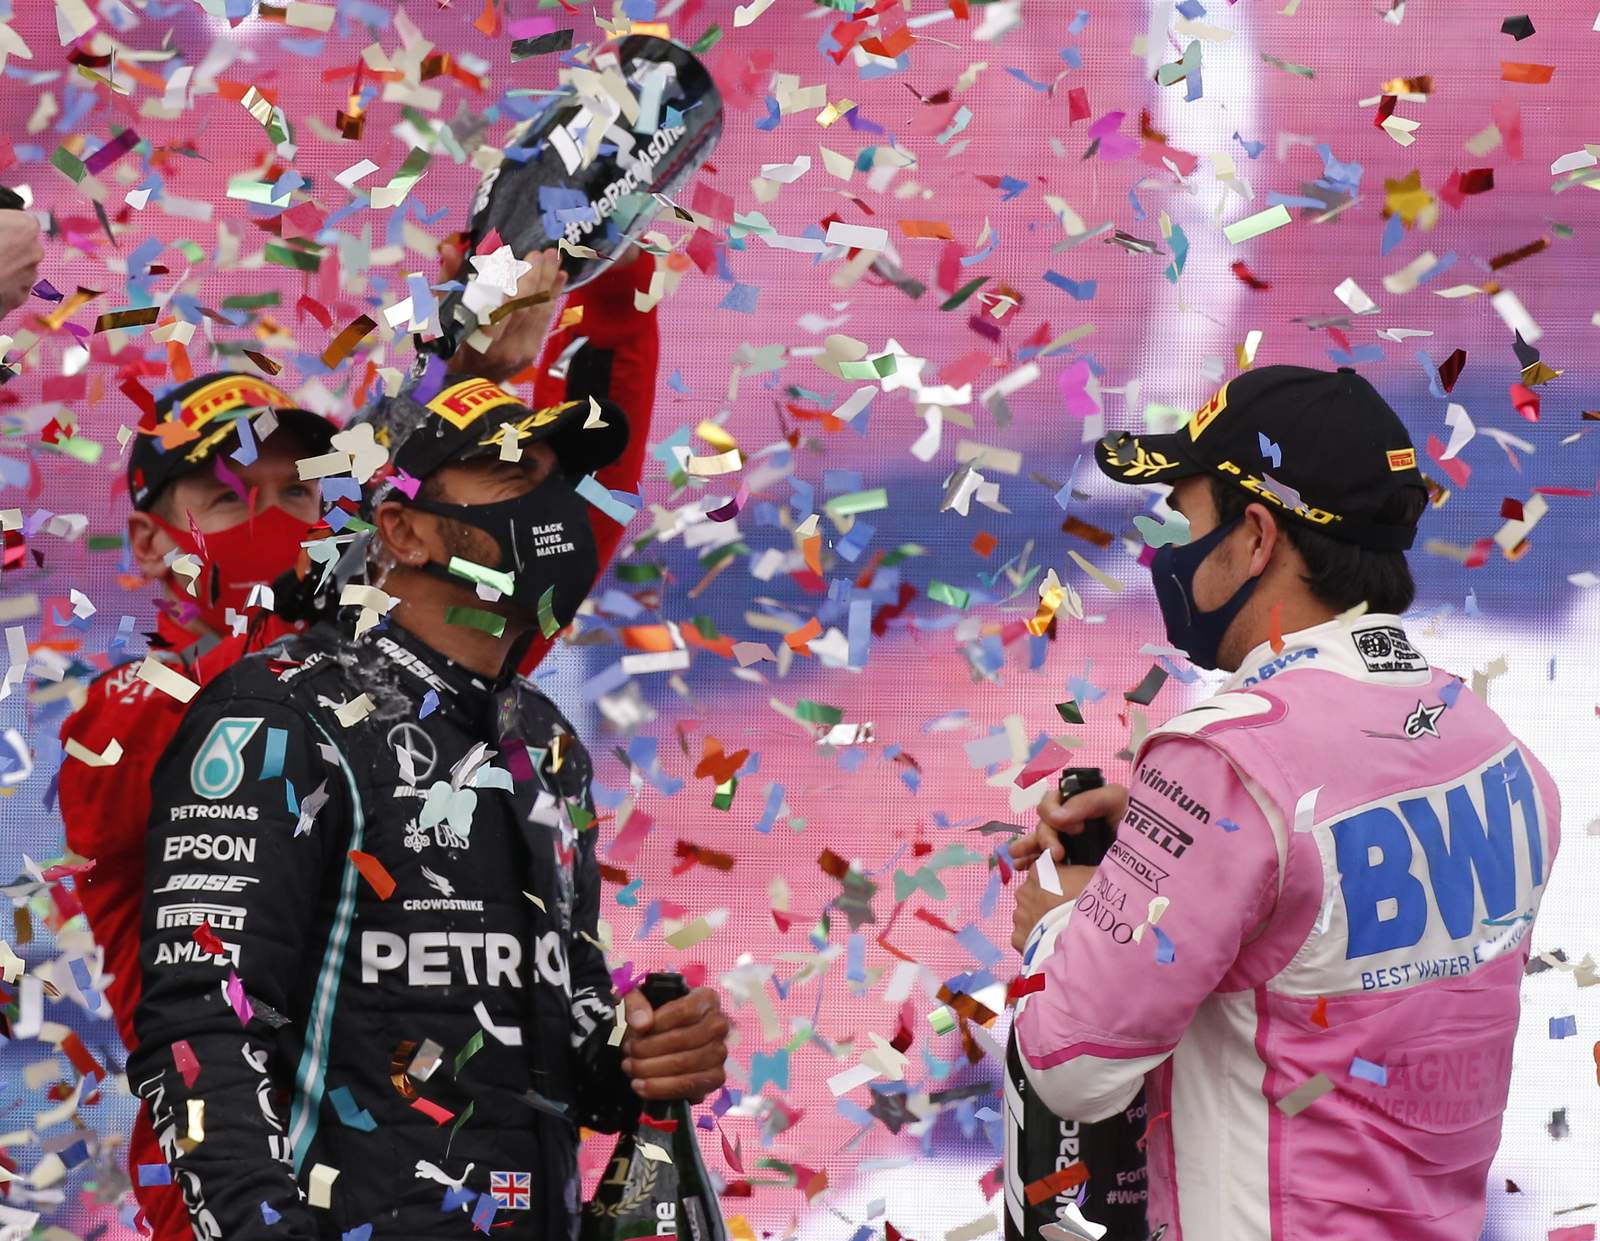 Hamilton lets tears flow as he clinches record 7th F1 title